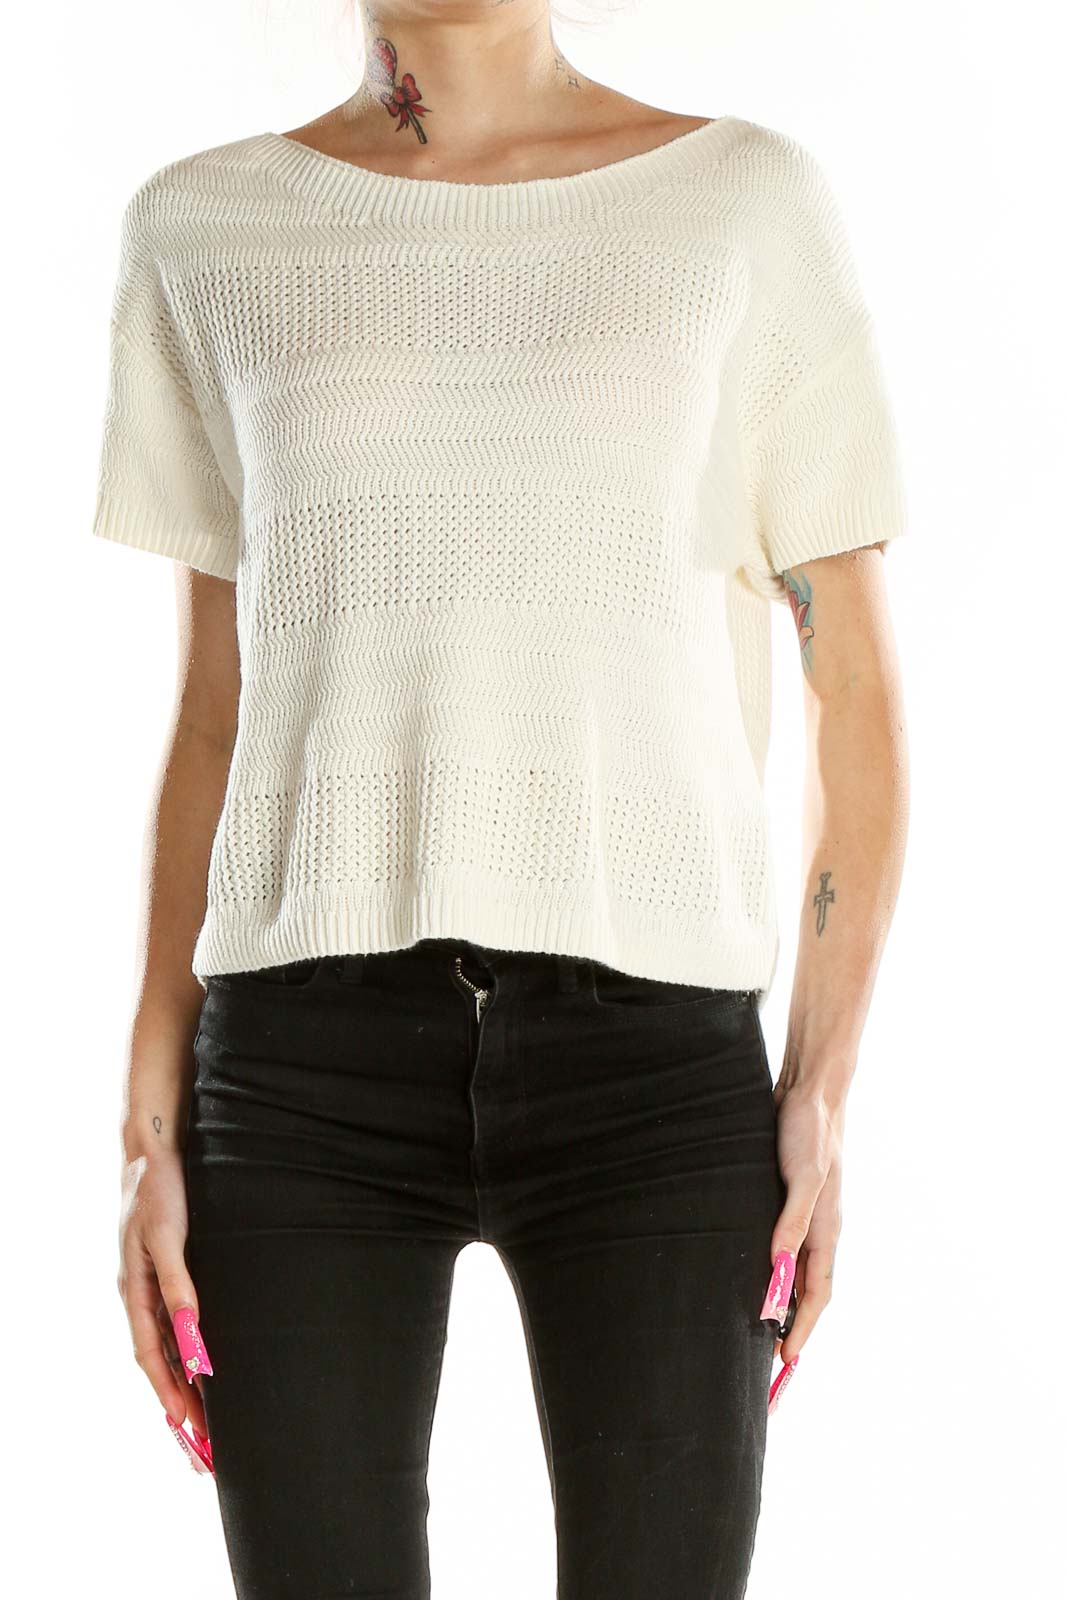 White Boatneck Knit Top Front